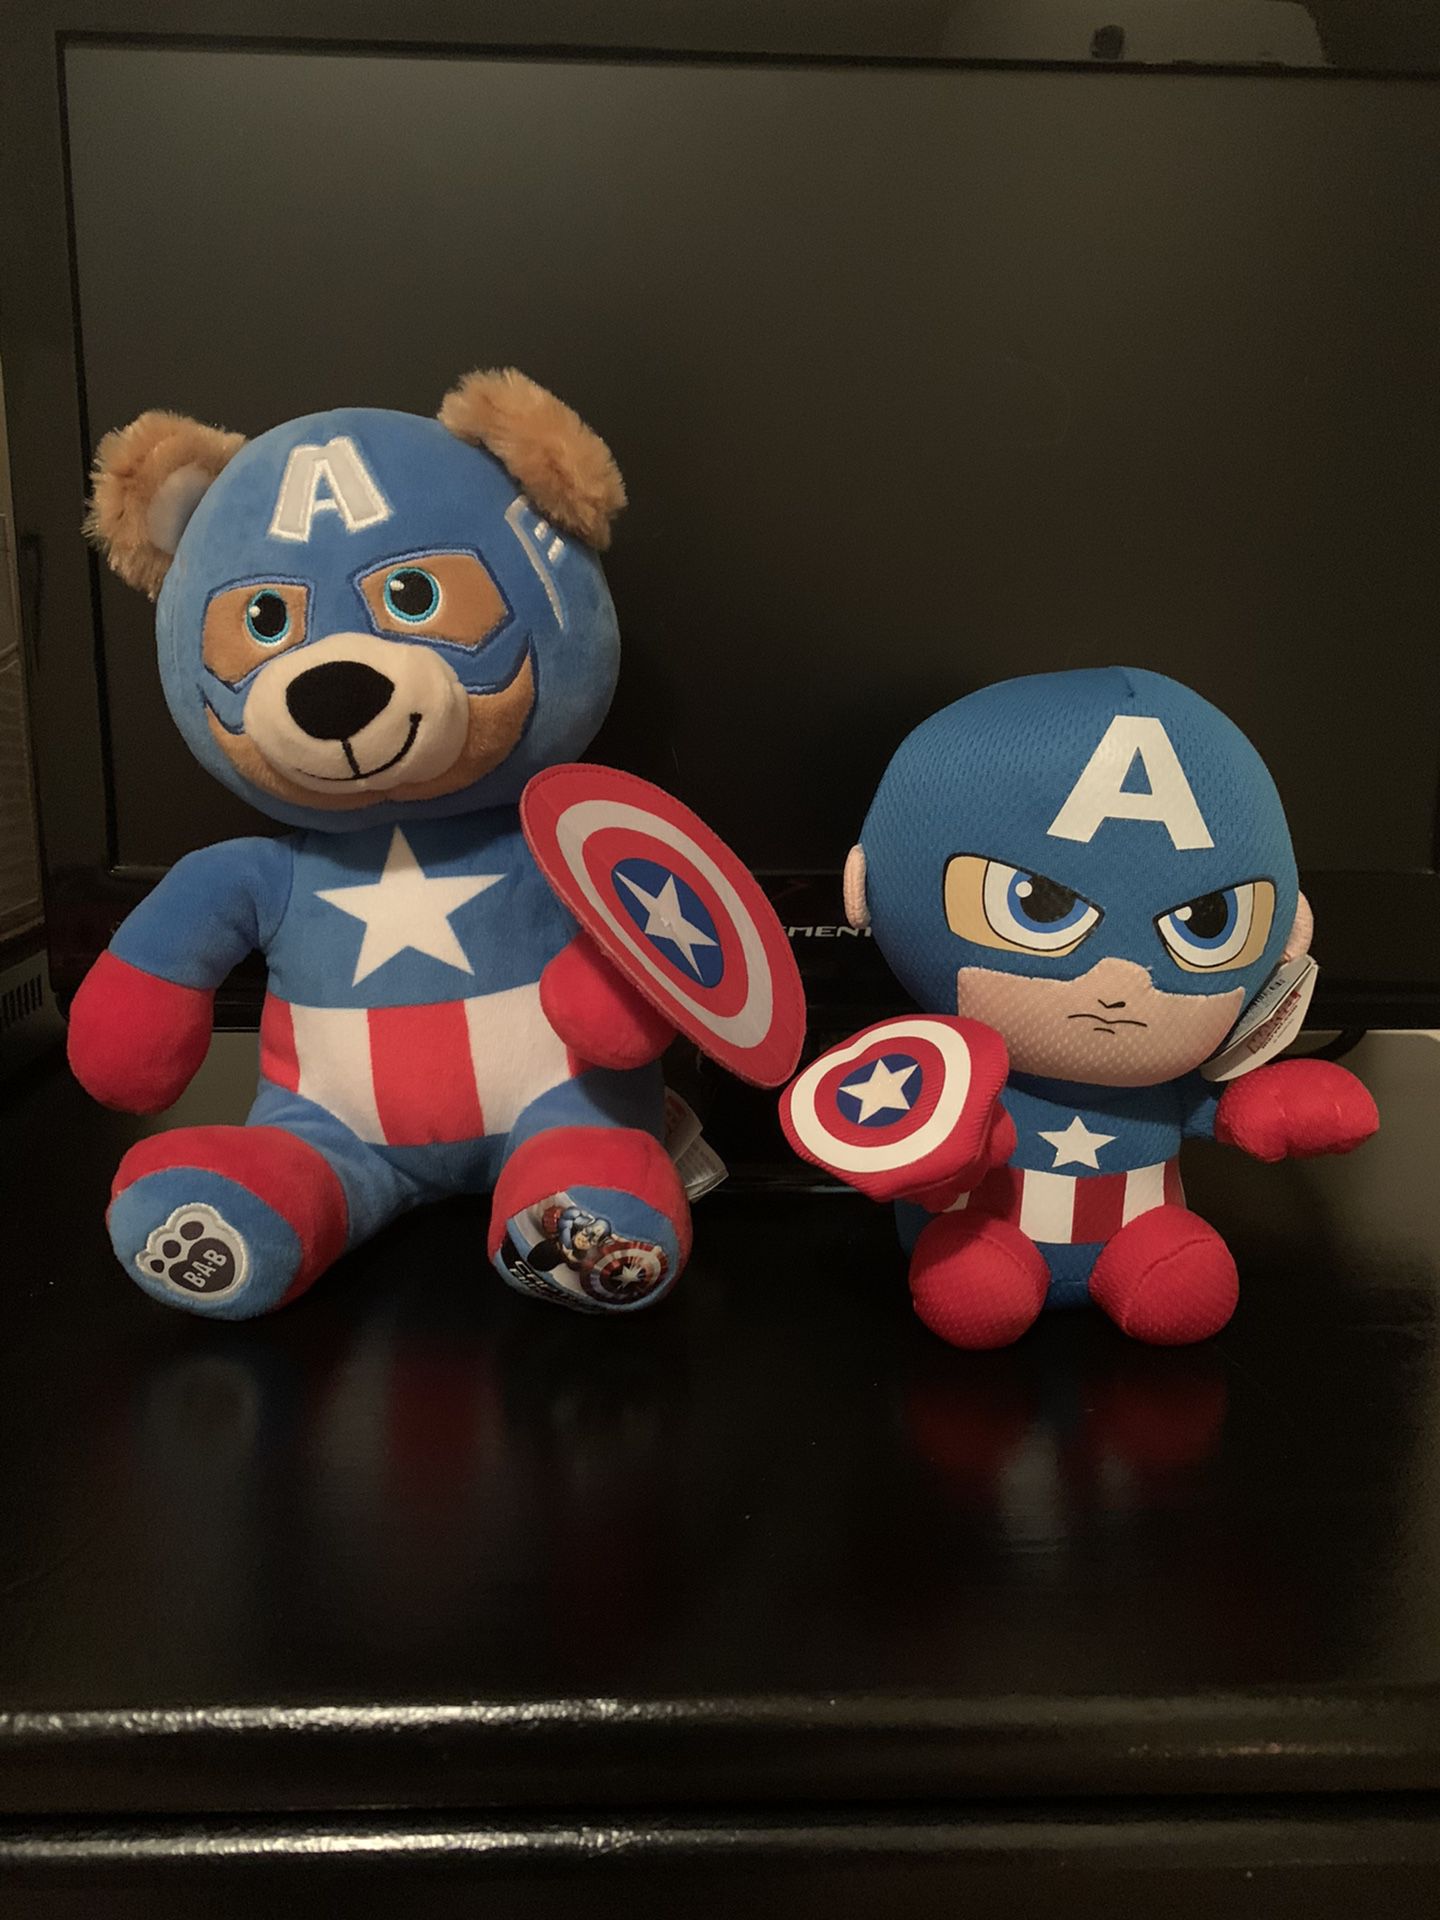 Captain America BAB and Plush Toy